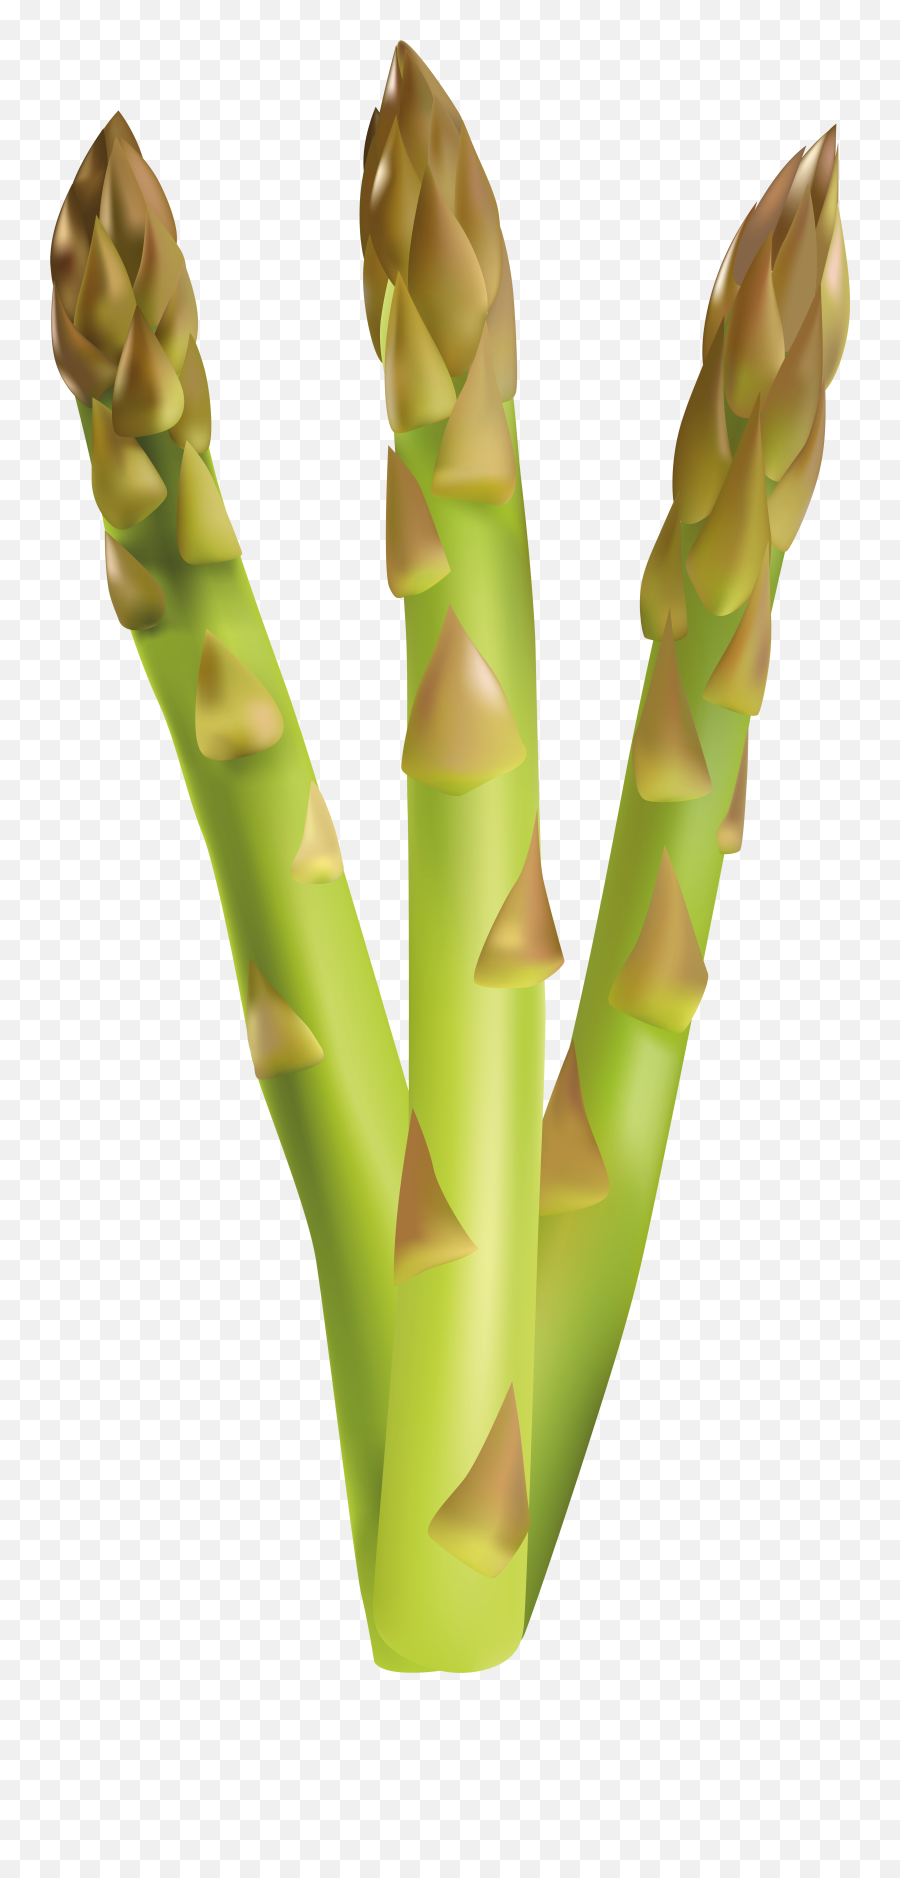 Download Asparagus Clipart - Full Size Png Image Pngkit Asparagus Clipart Png,Asparagus Png